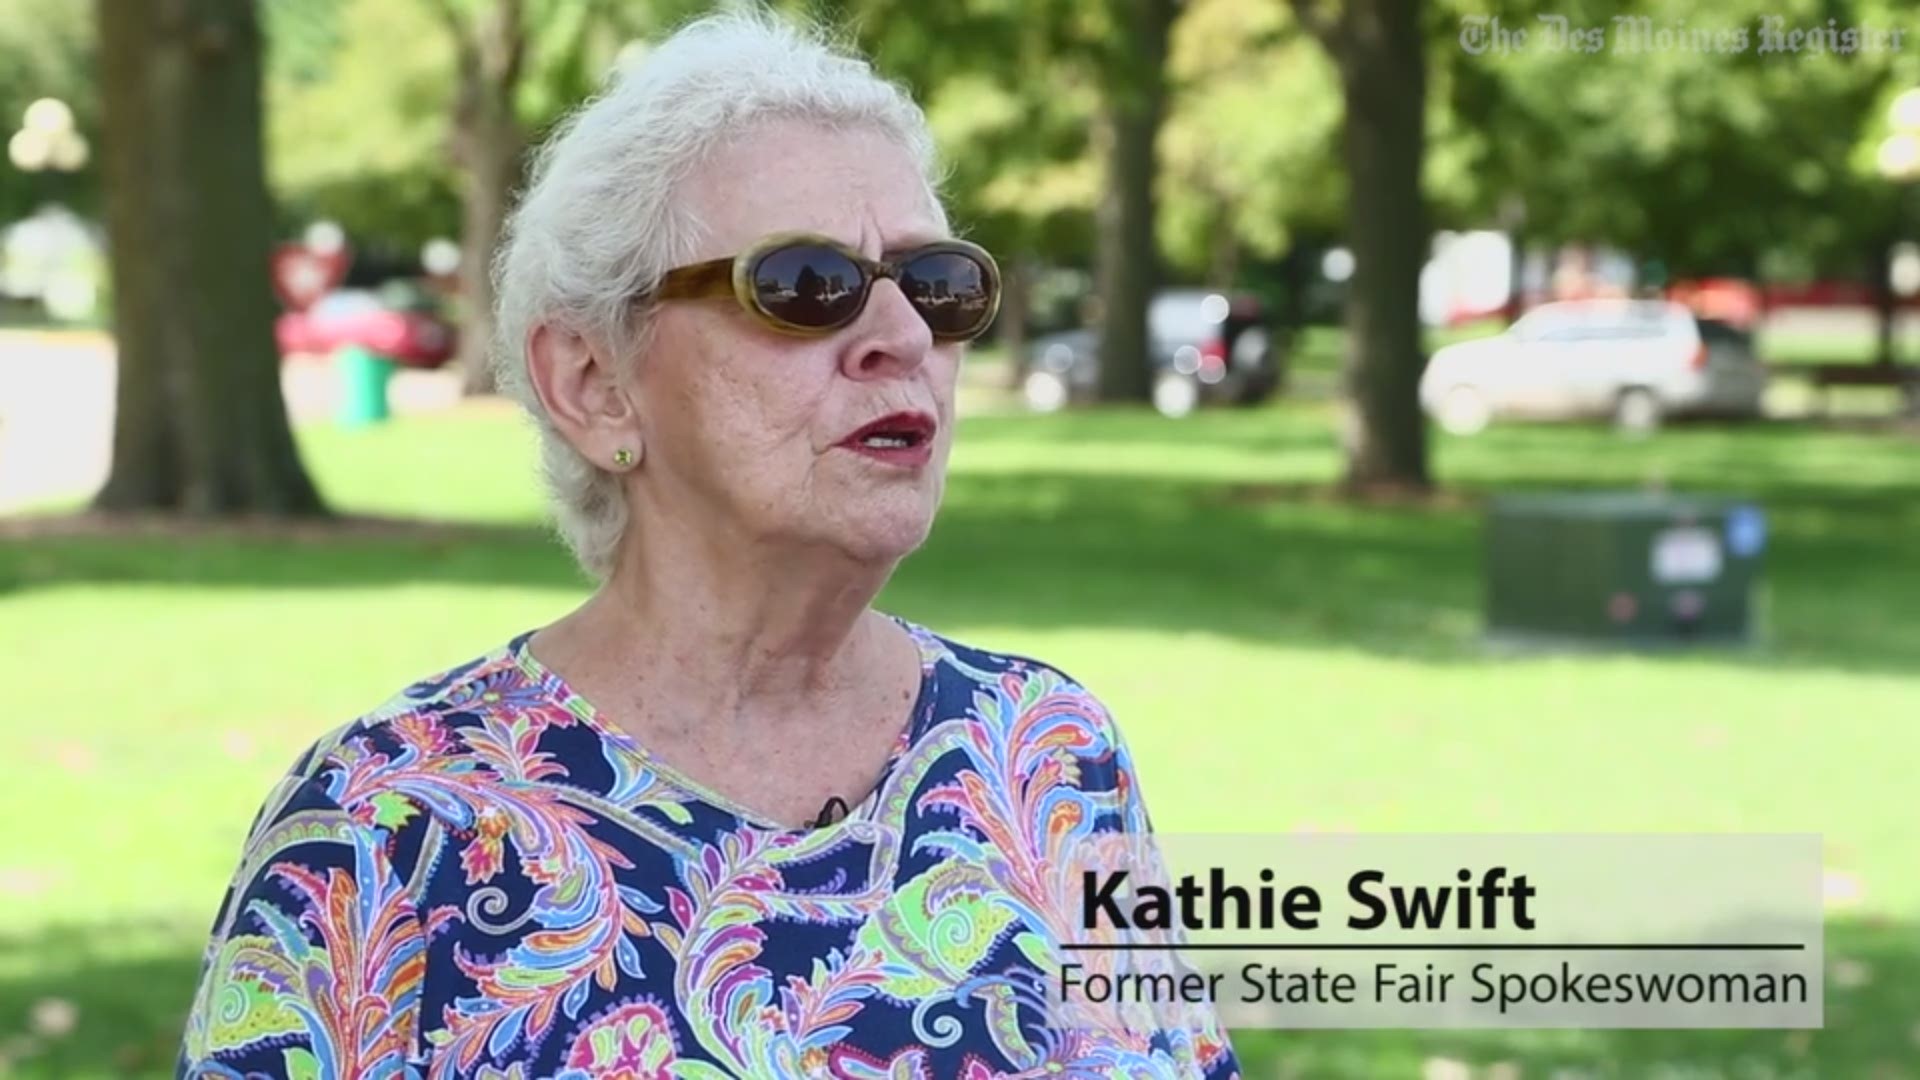 As the Iowa State Fair got started 20 years ago, two people were shot dead in the exhibitor campgrounds. Jada Blewer Smith, daughter of Bobie and Marilyn Blewer, remembers the shock of discovering her parents had been murdered. The Register